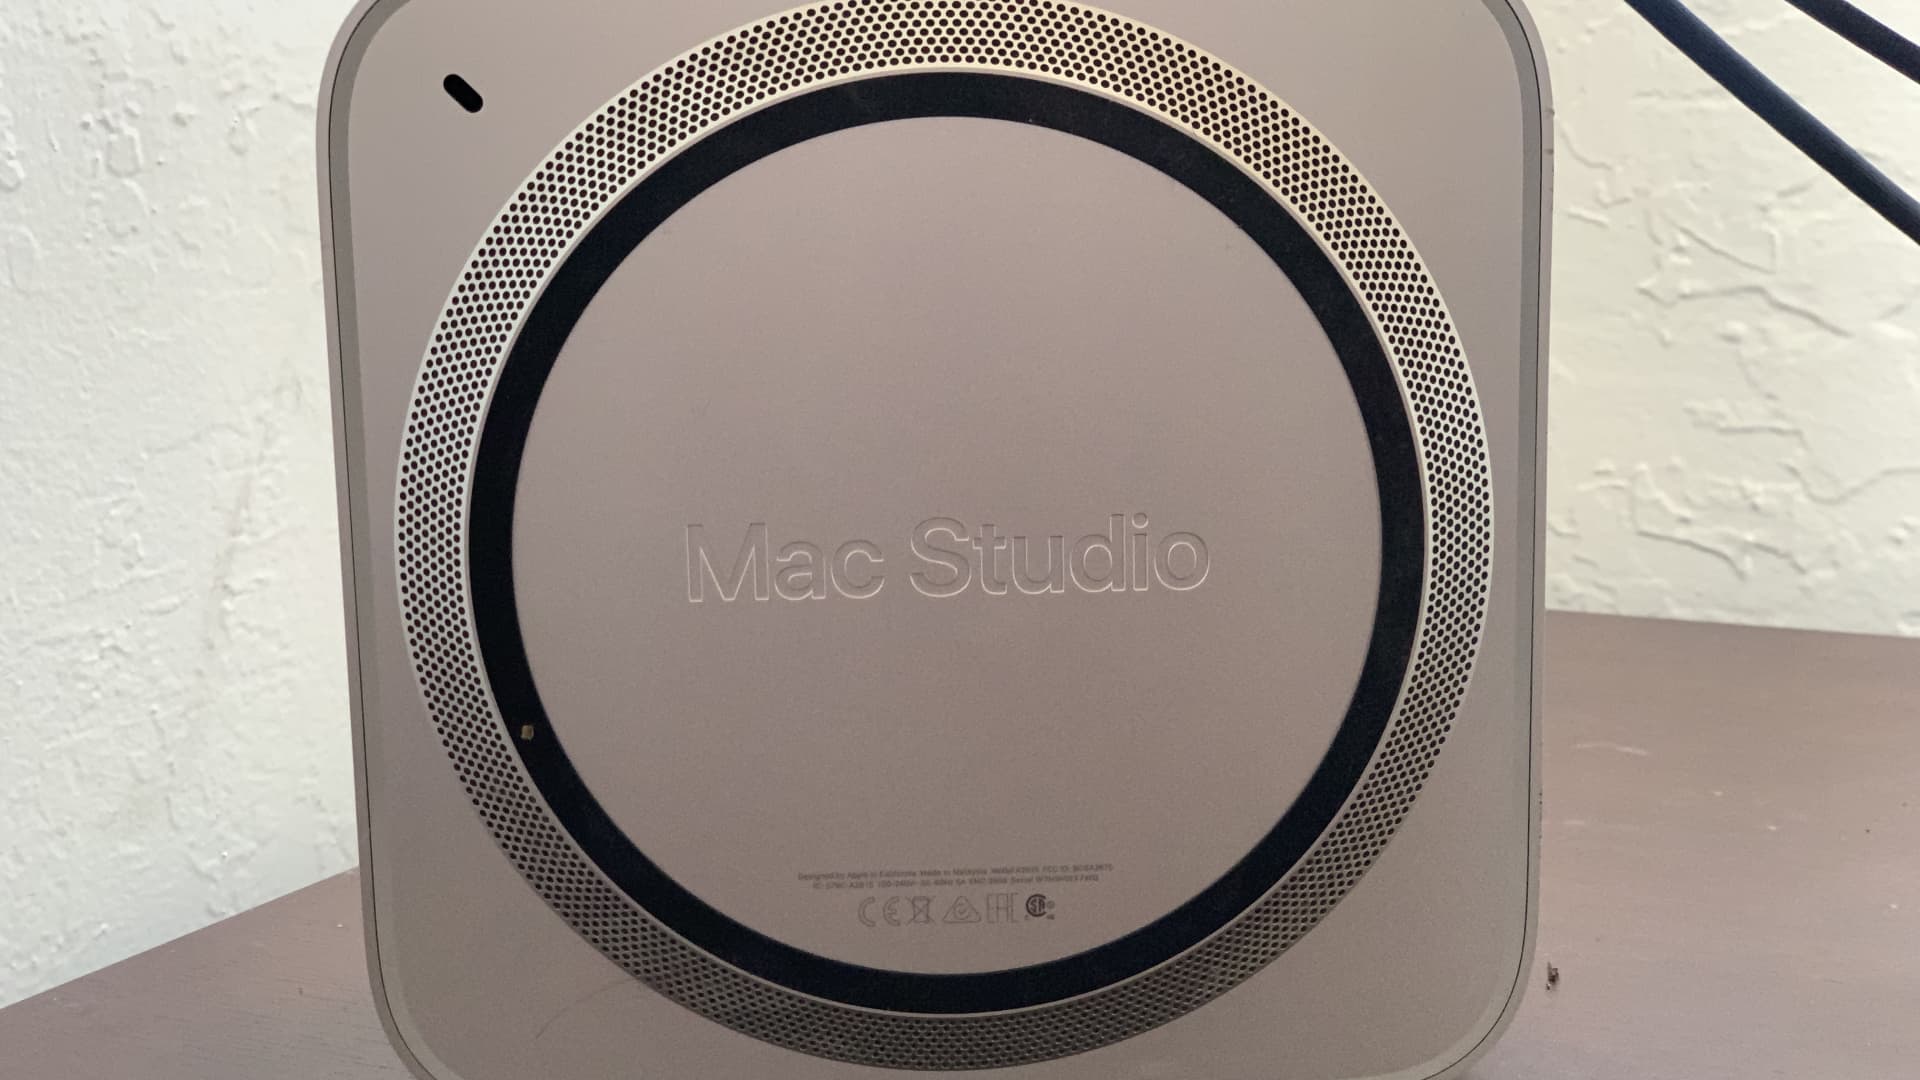 The Mac Studio I tested was assembled in Malaysia.